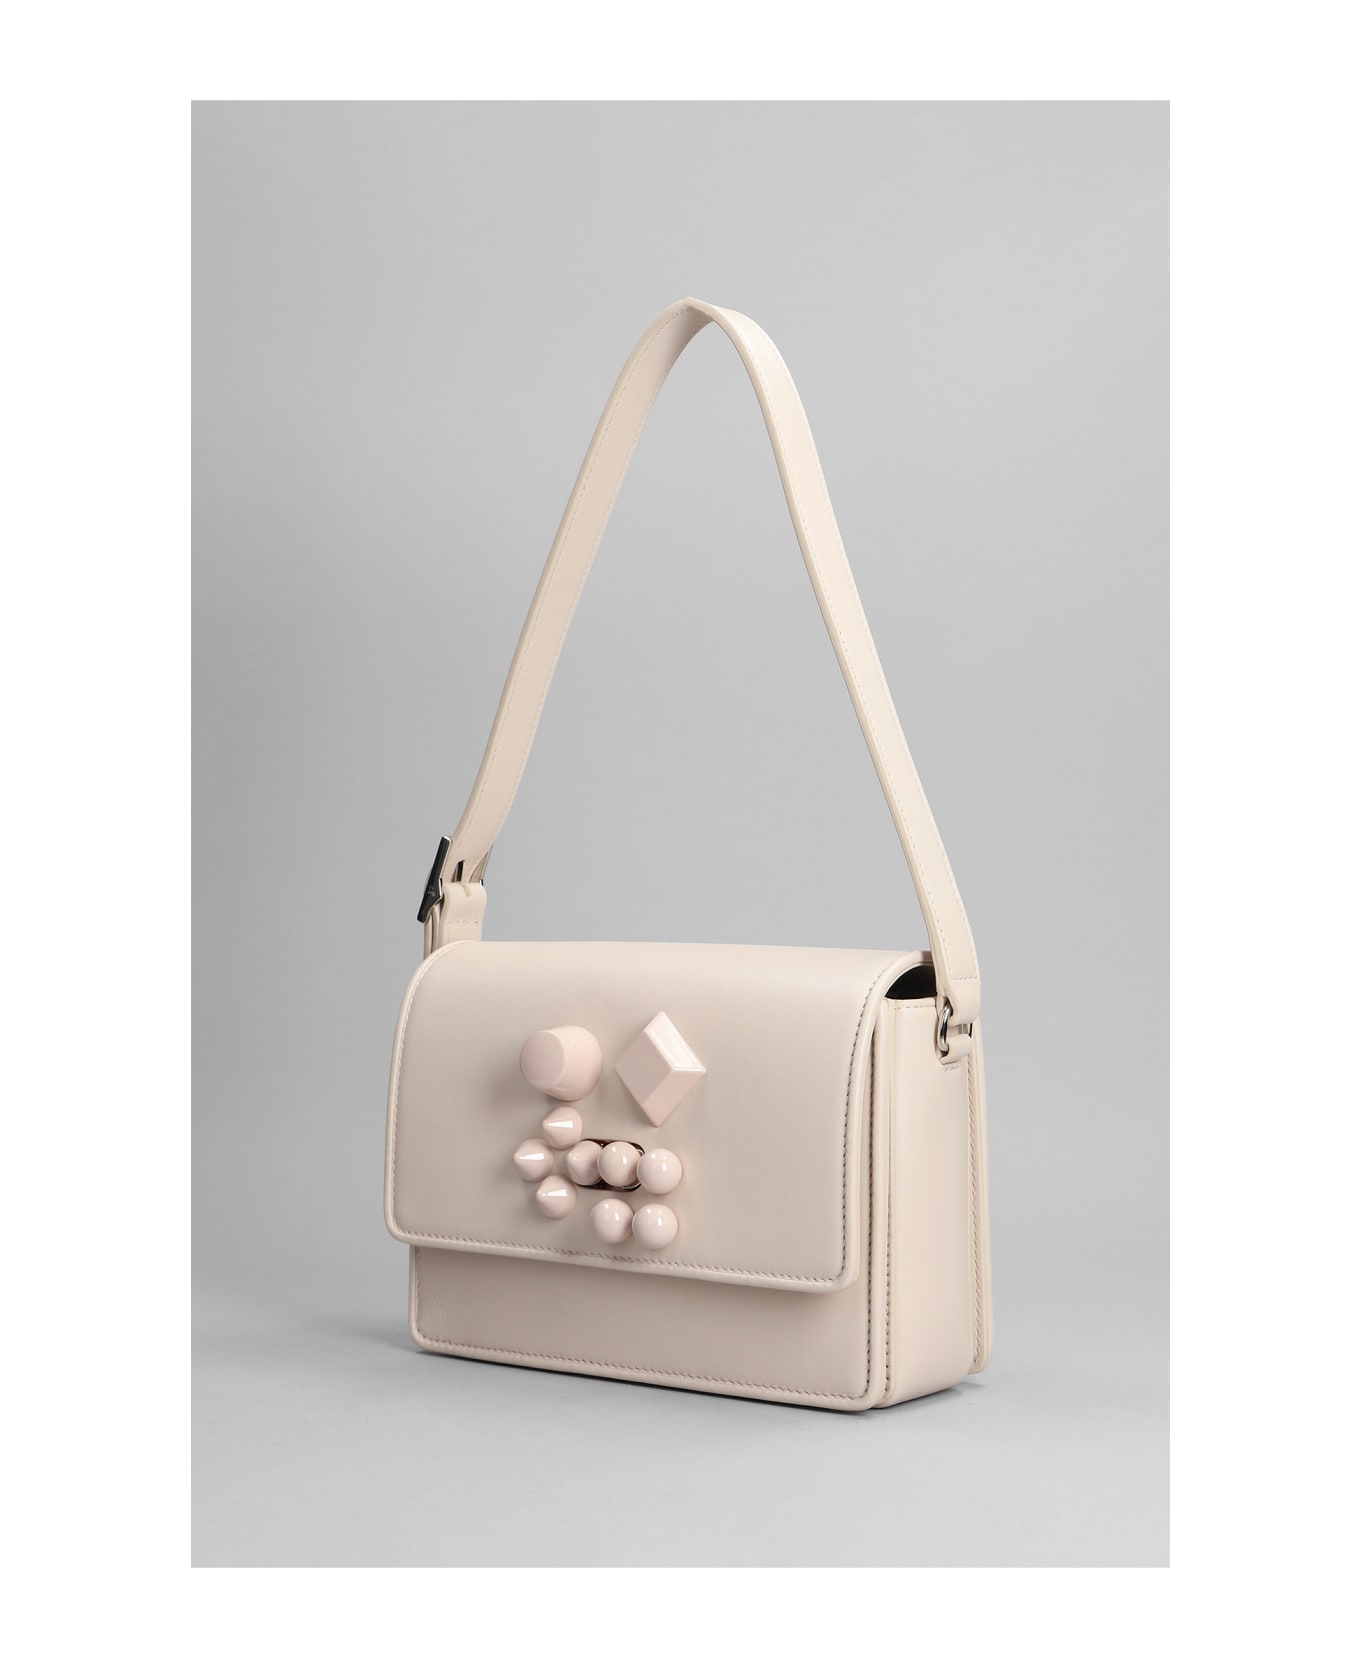 Christian Louboutin Carasky Shoulder Bag In Powder Leather - Nude & Neutrals